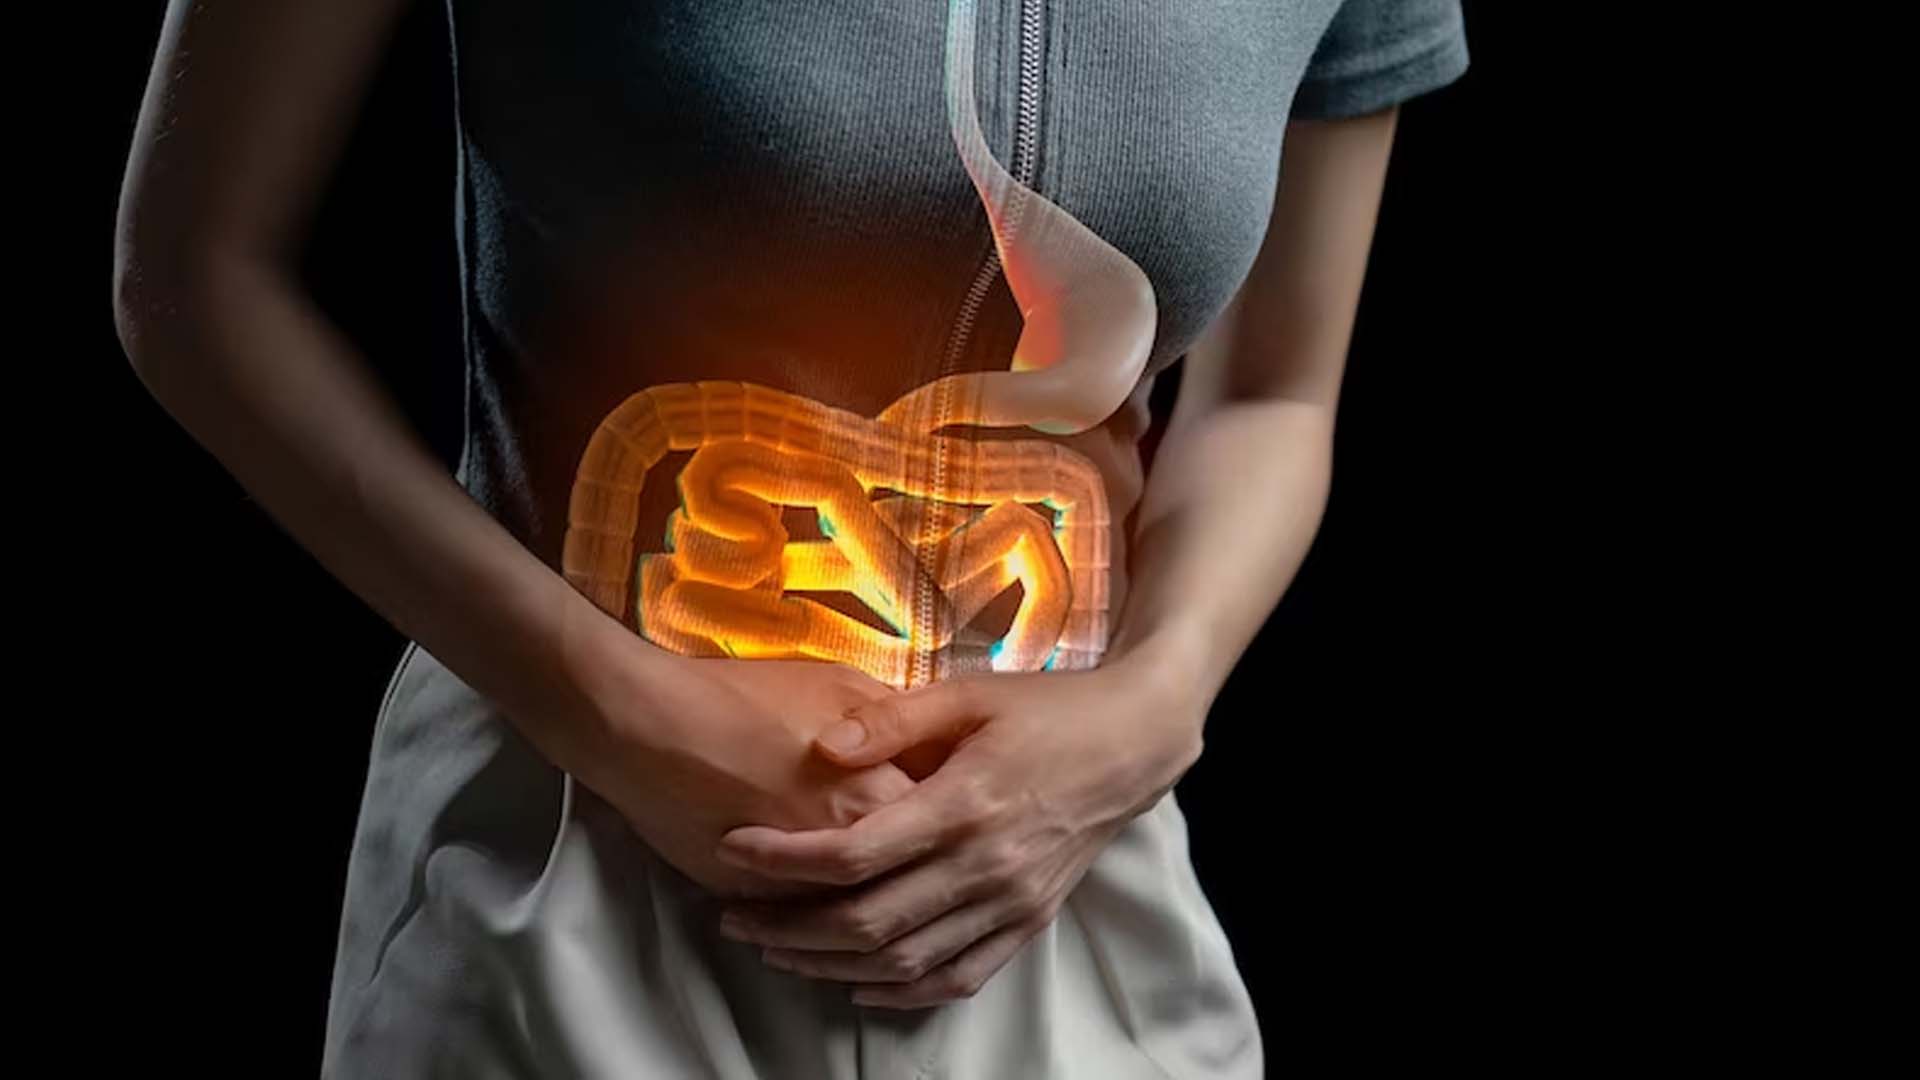 What are Digestive Disorders? Causes, Symptoms, Treatment and Diet